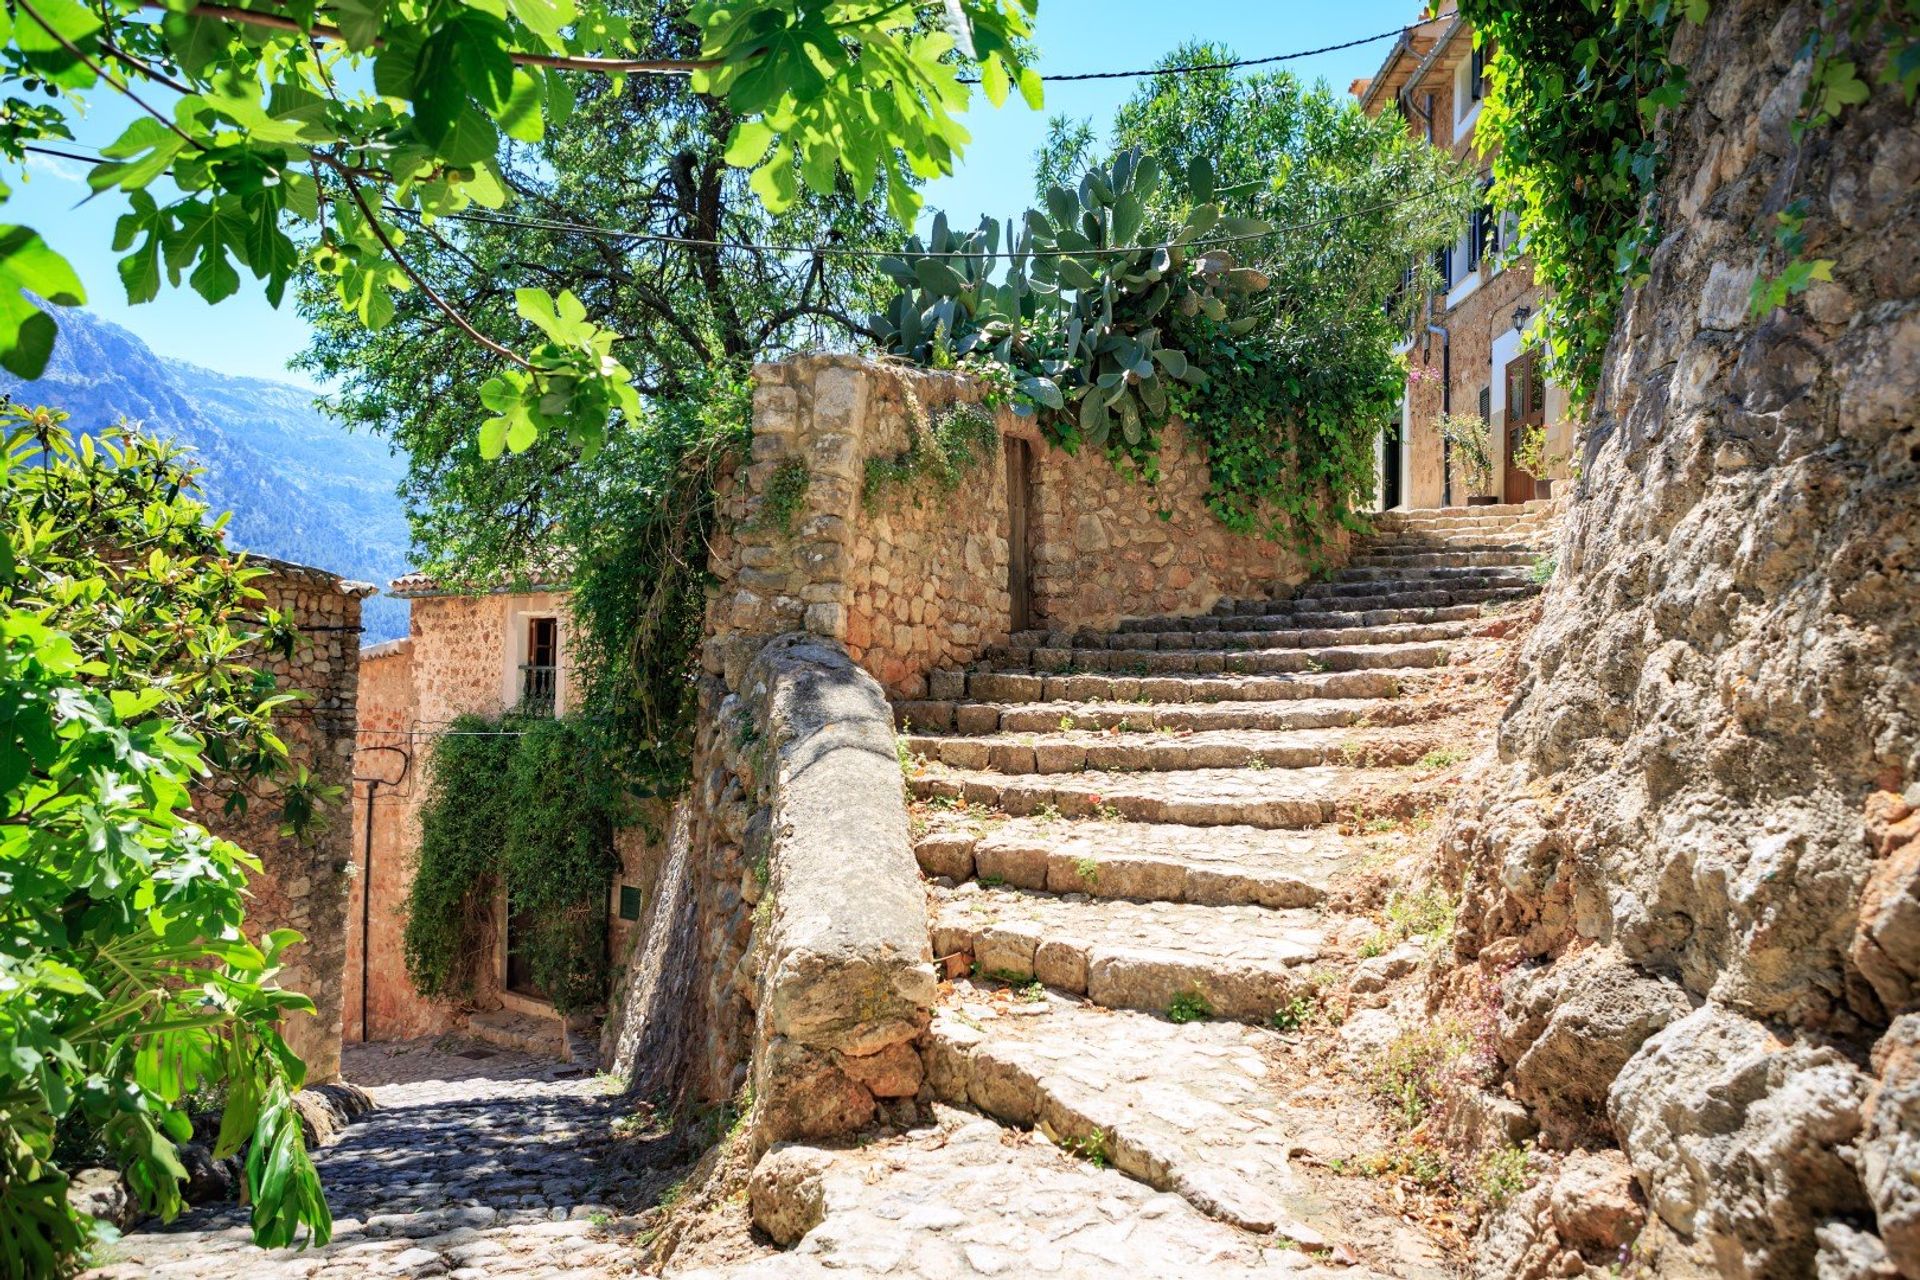 Rustic stone alleyways leading to Fornalutx, a traditional village 5km northeast of Sóller